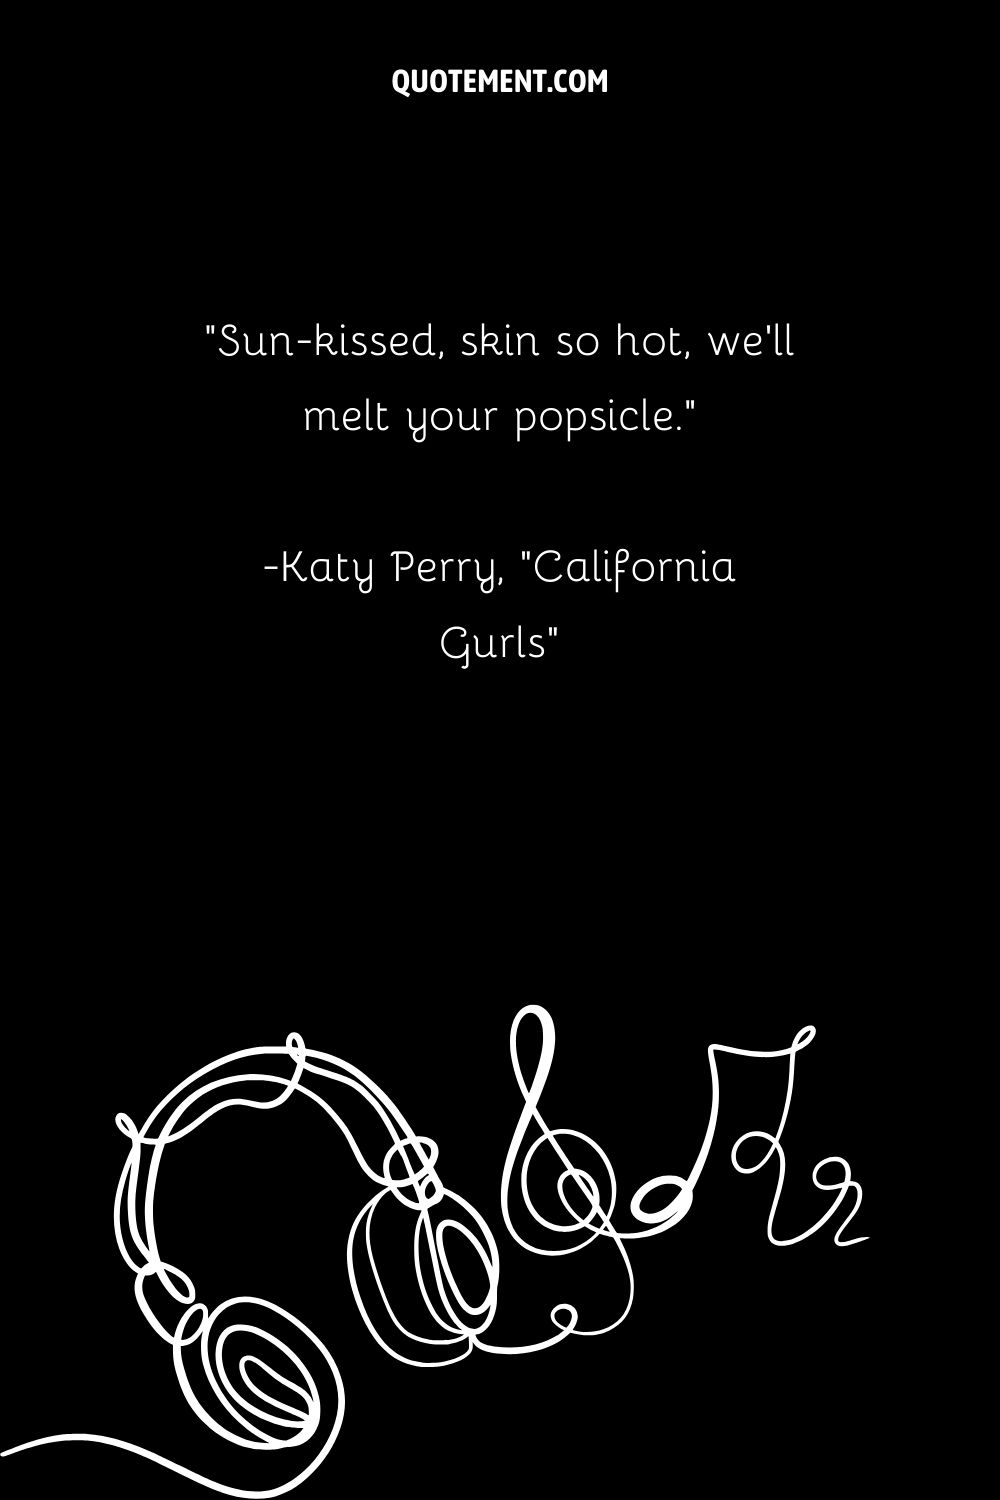 “Sun-kissed, skin so hot, we’ll melt your popsicle.” — Katy Perry, “California Gurls”